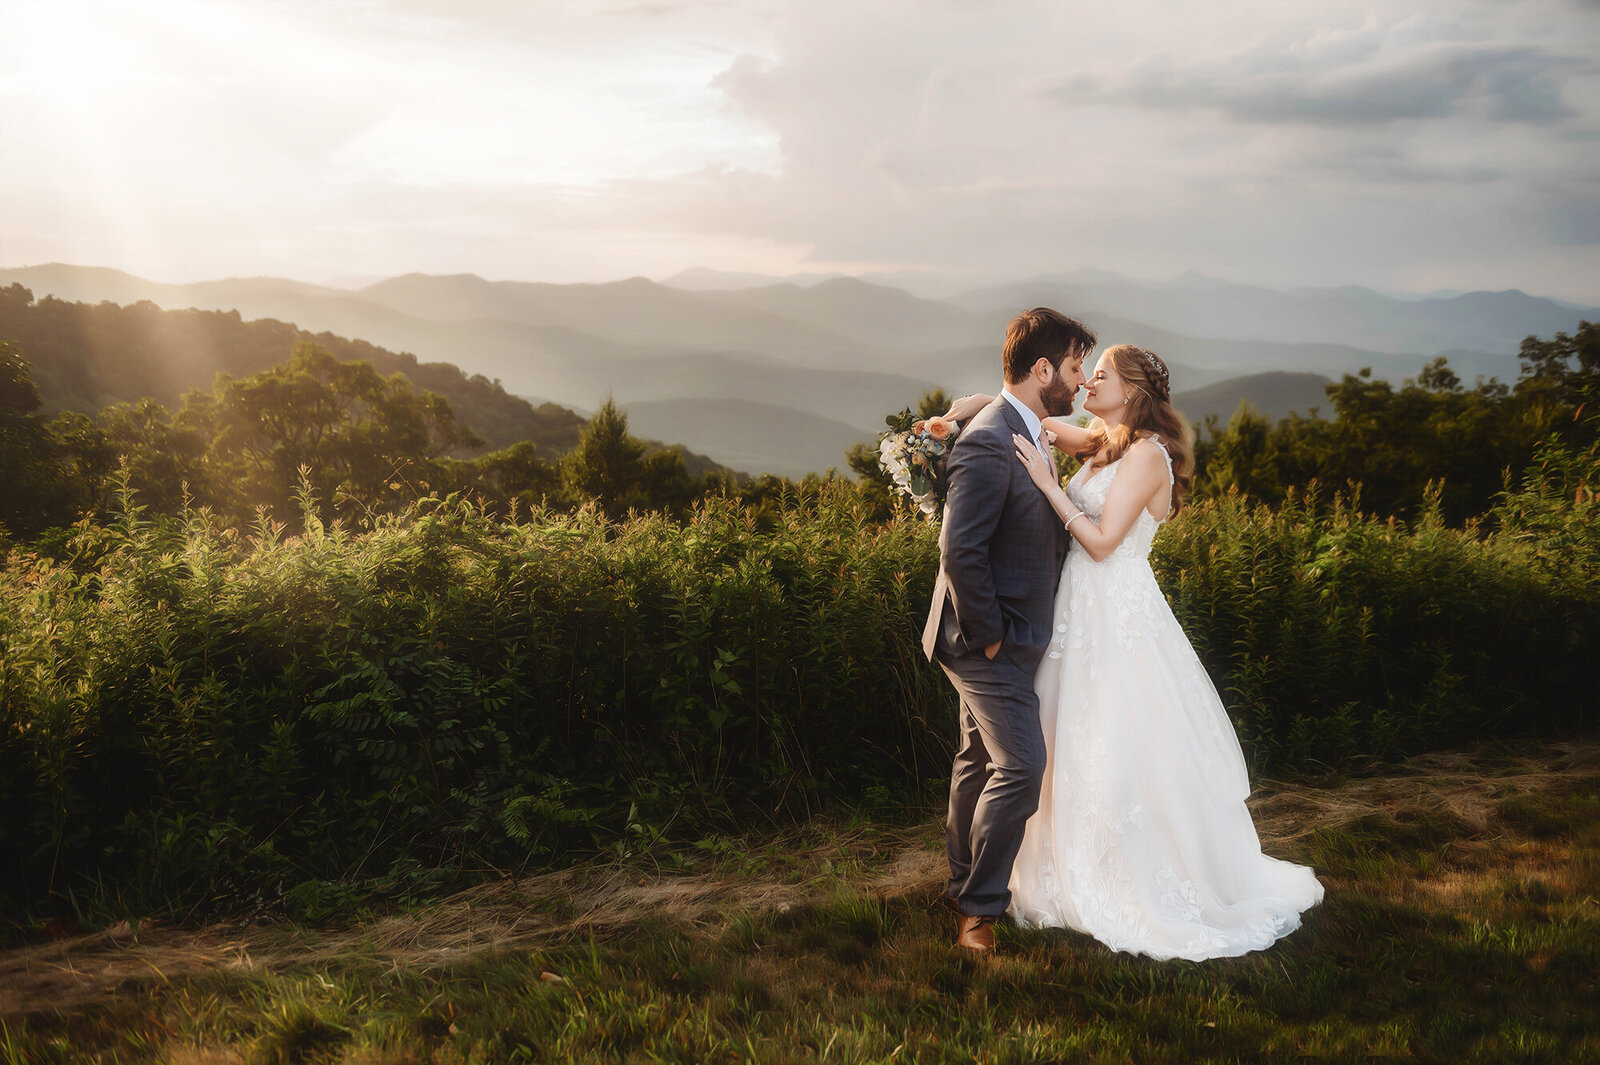 Newlyweds pose for Wedding Photos in Asheville, NC.